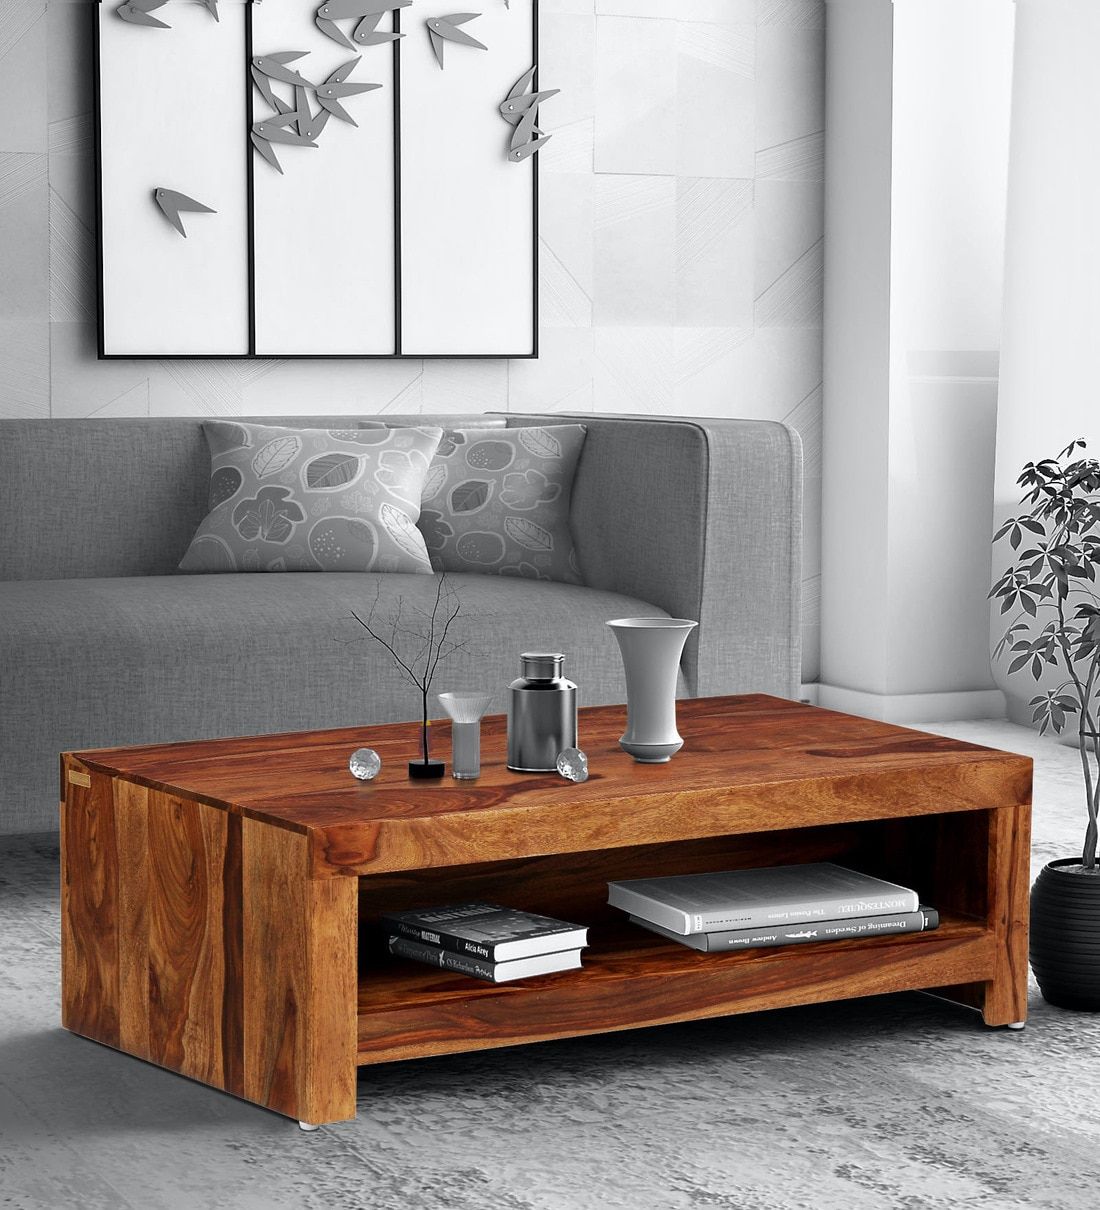 Buy Acropolis Solid Wood Coffee Table In Rustic Teak Finish Within Rustic Coffee Tables (View 12 of 15)